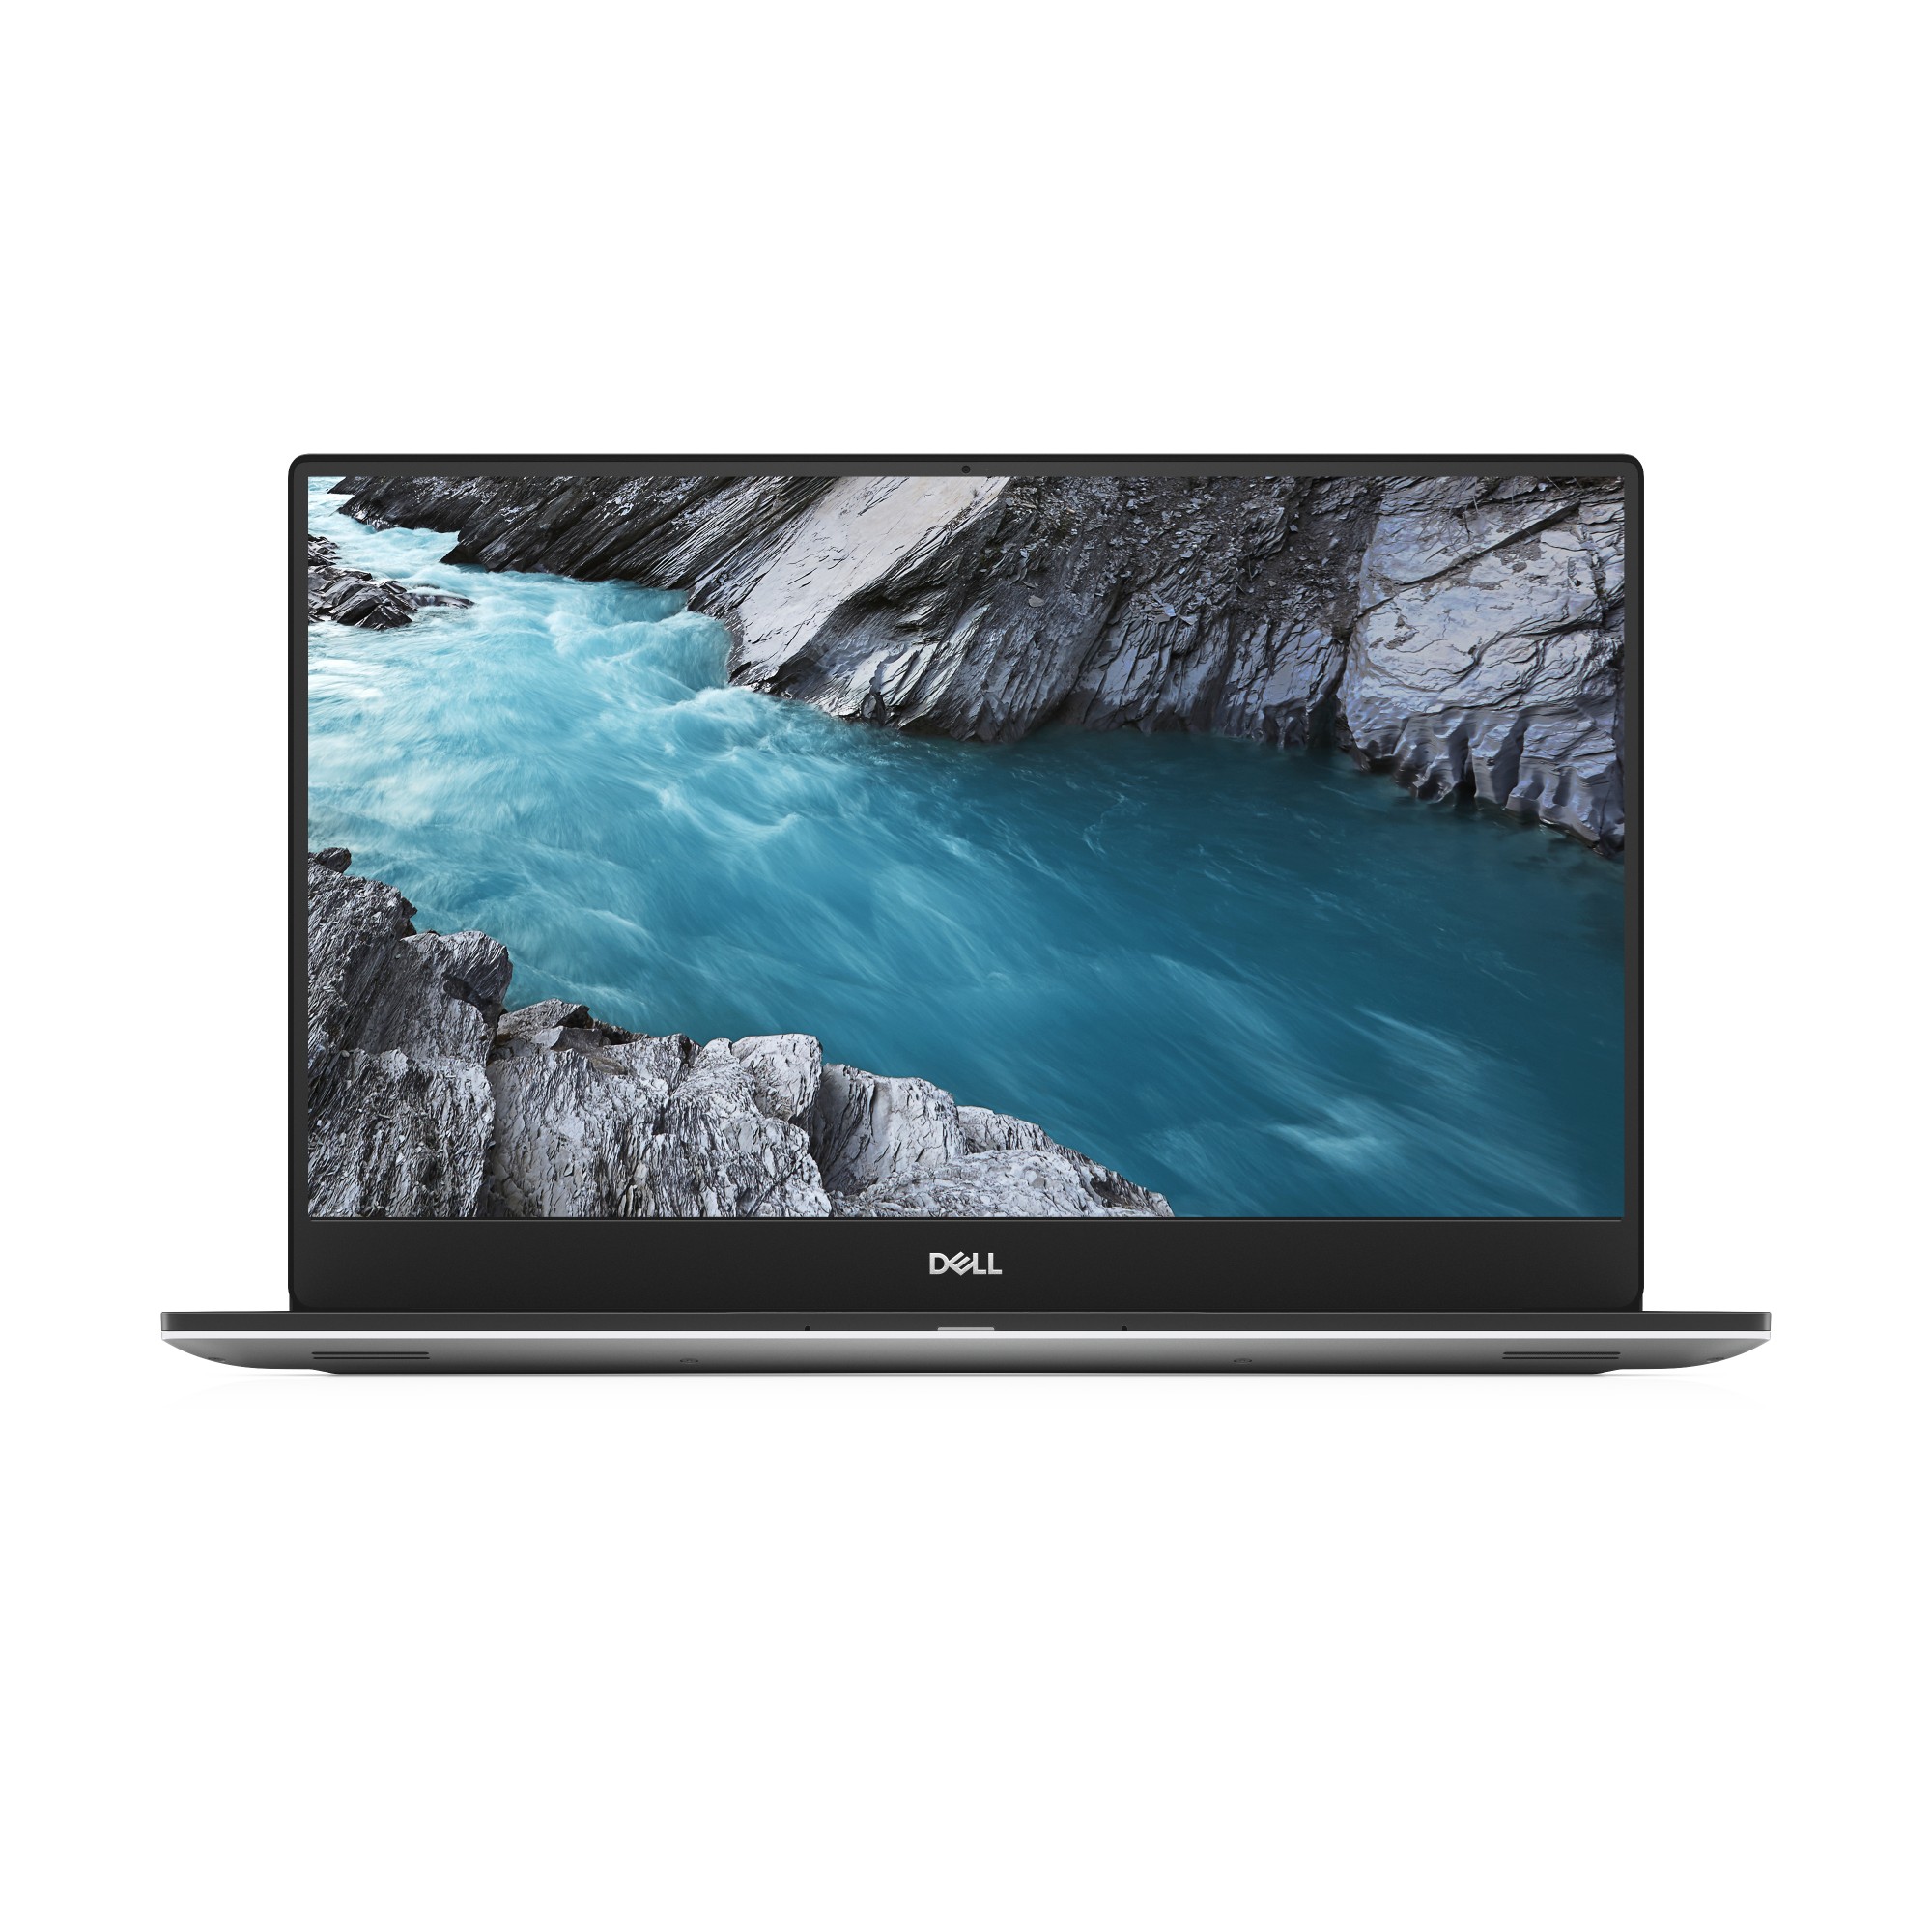 DELL XPS 15 7590 i5-9300H Notebook 39.6 cm (15.6